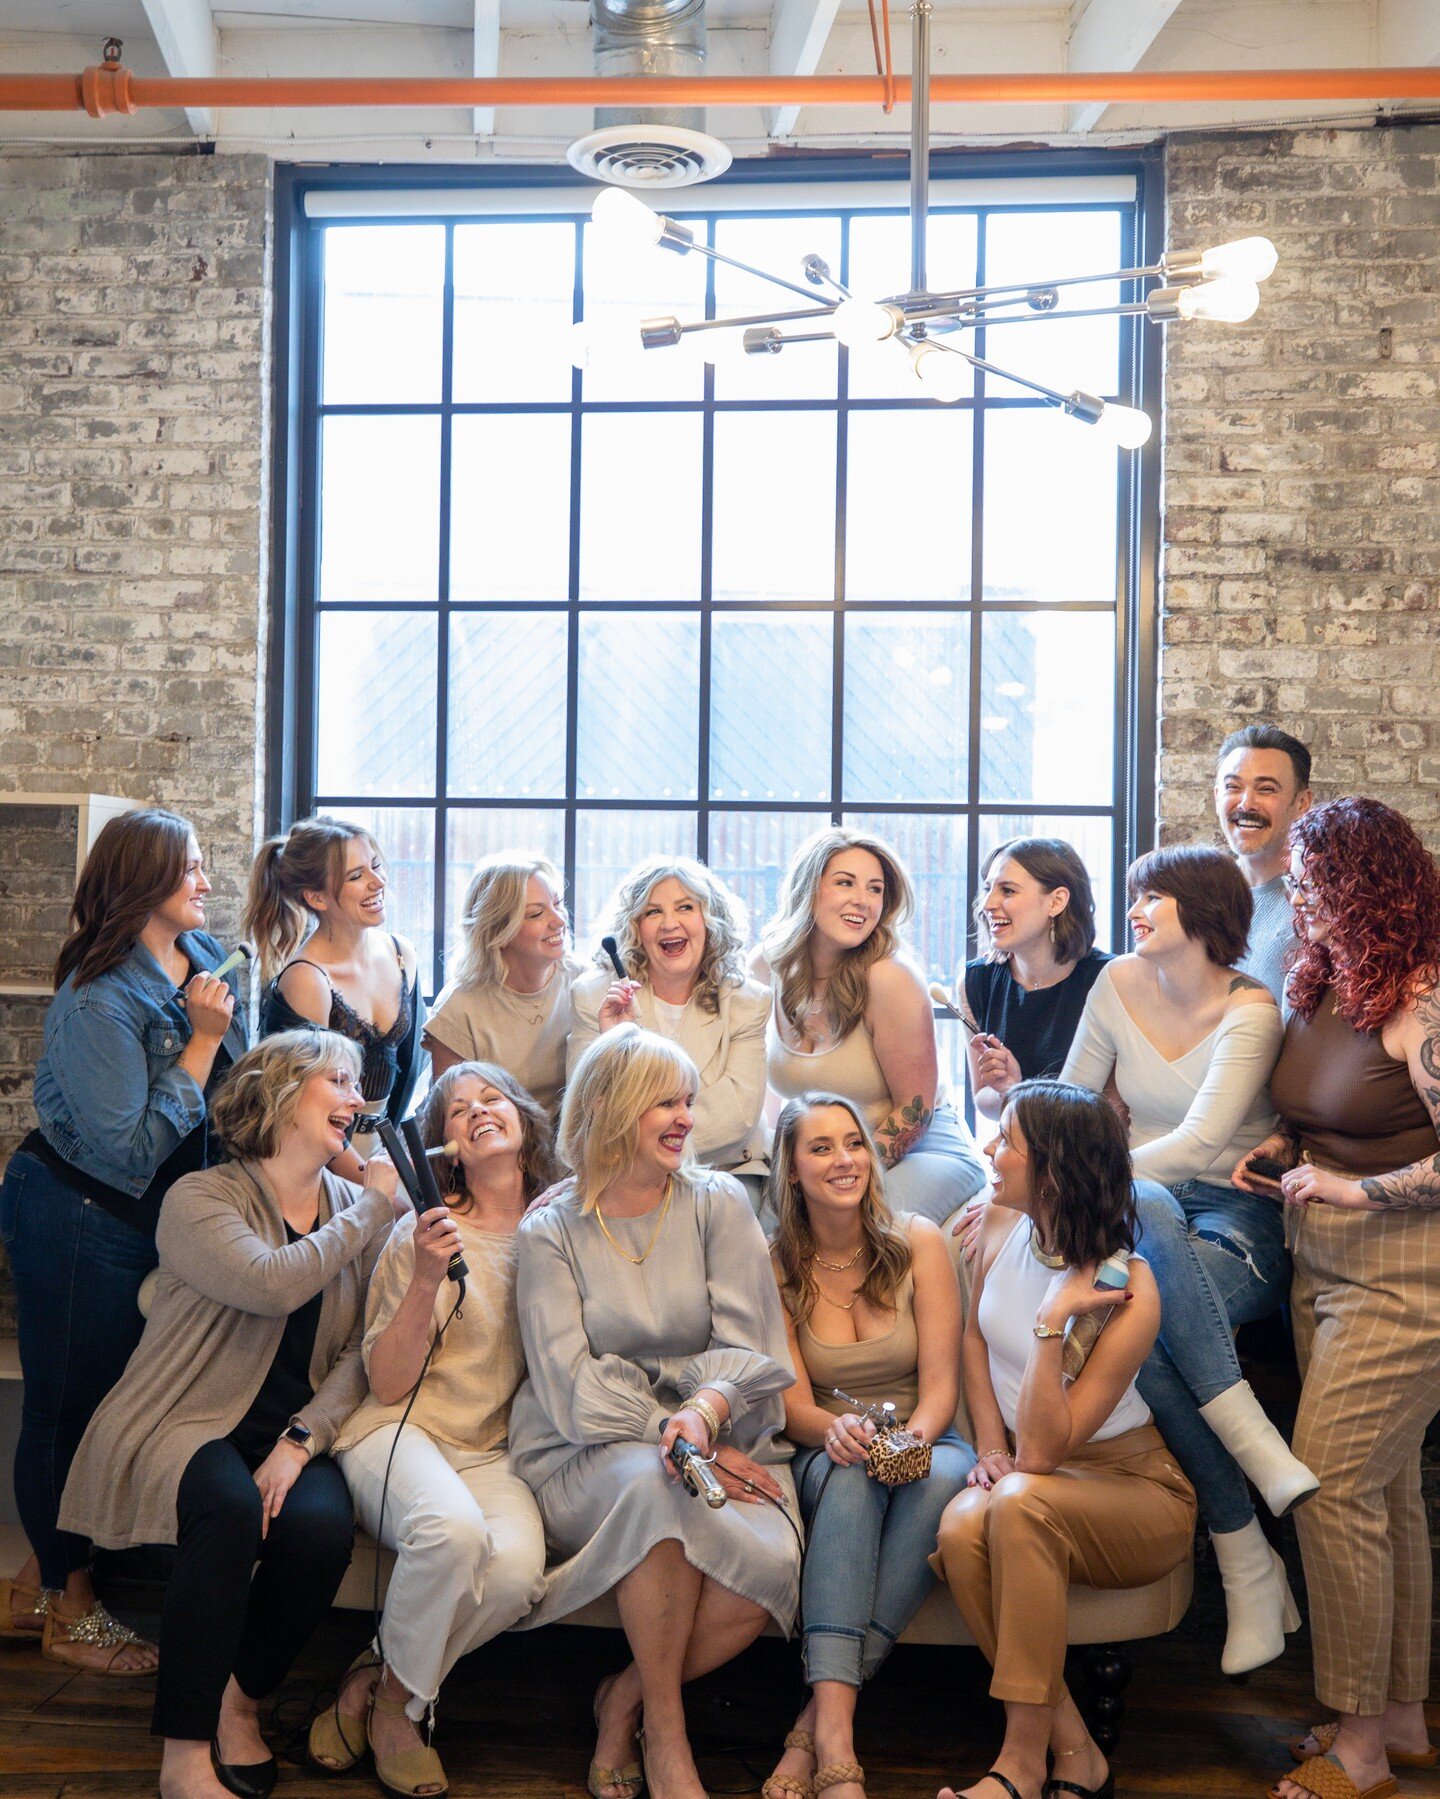 The Beauty Patrol Team 2023

Incredible humans inside and out ❤

This team of hair and makeup experts makes my world go round during photo shoots. They bring light and levity into busy mornings with clients, capture THE best BTS clips, and will help 